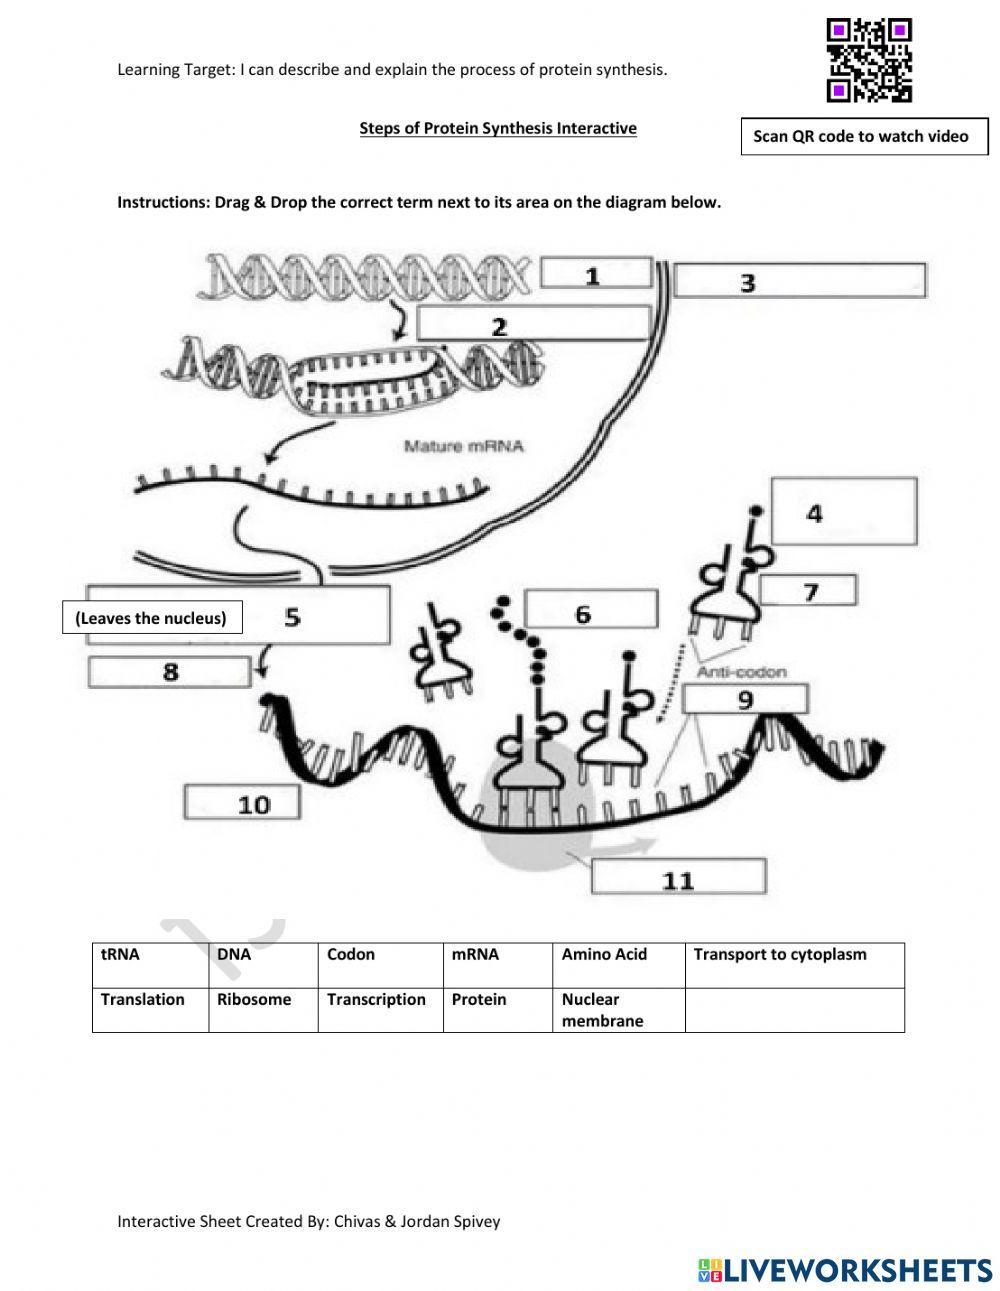 Steps of Protein Synthesis Interactive